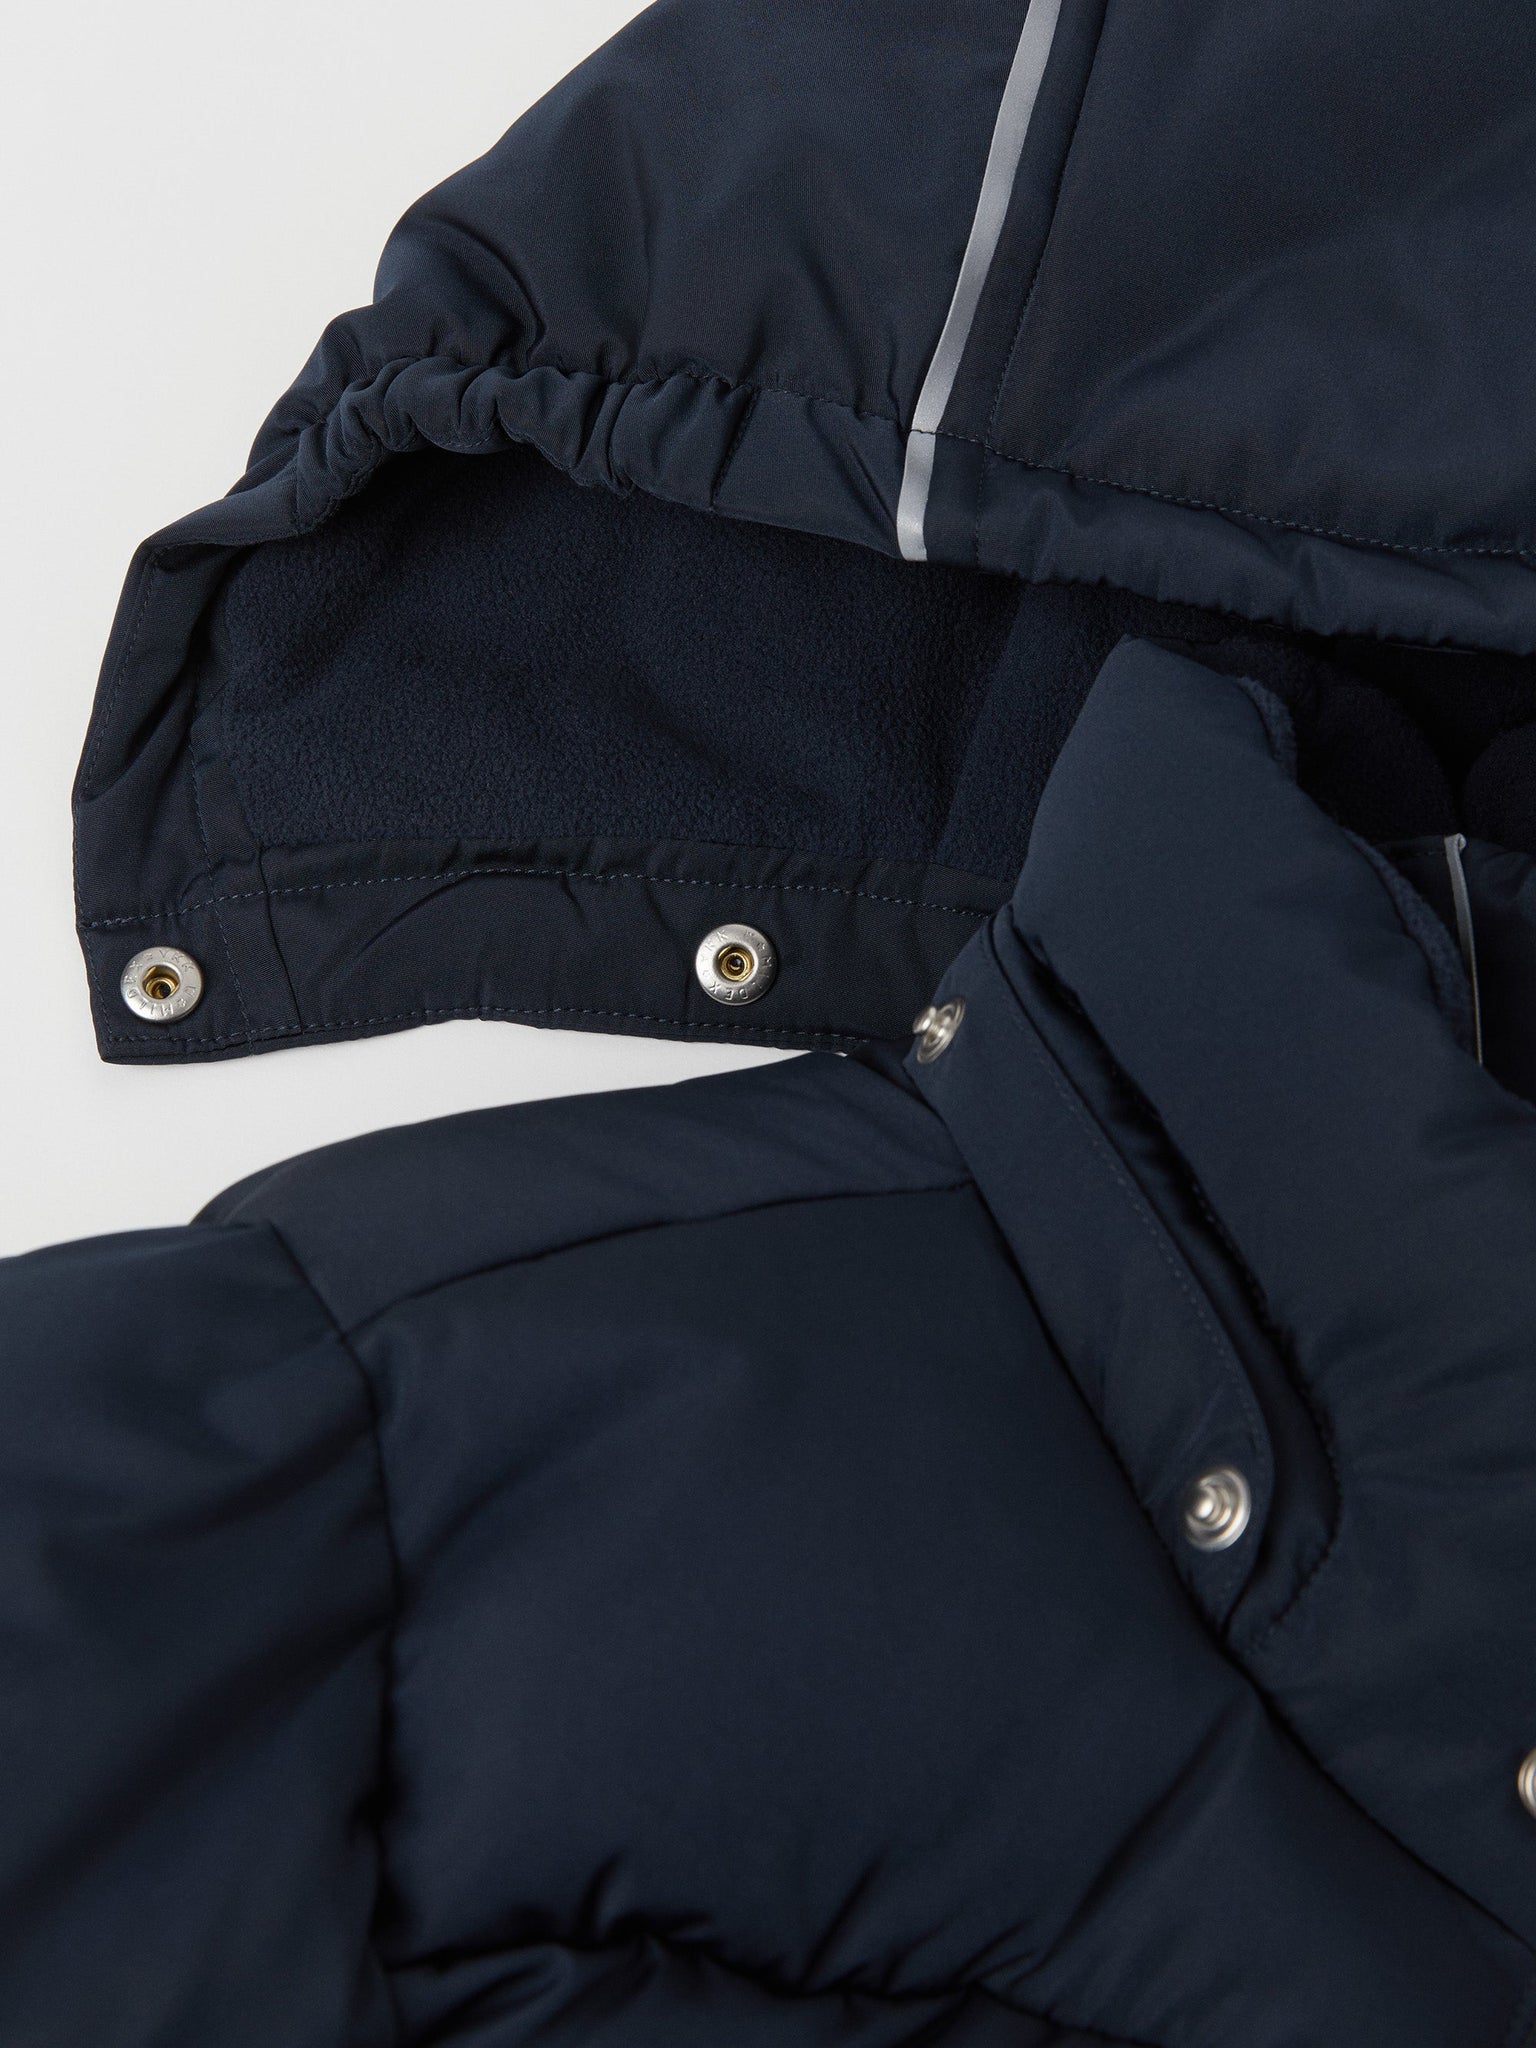 Navy Kids Padded Waterproof Coat from the Polarn O. Pyret outerwear collection. Ethically produced kids outerwear.